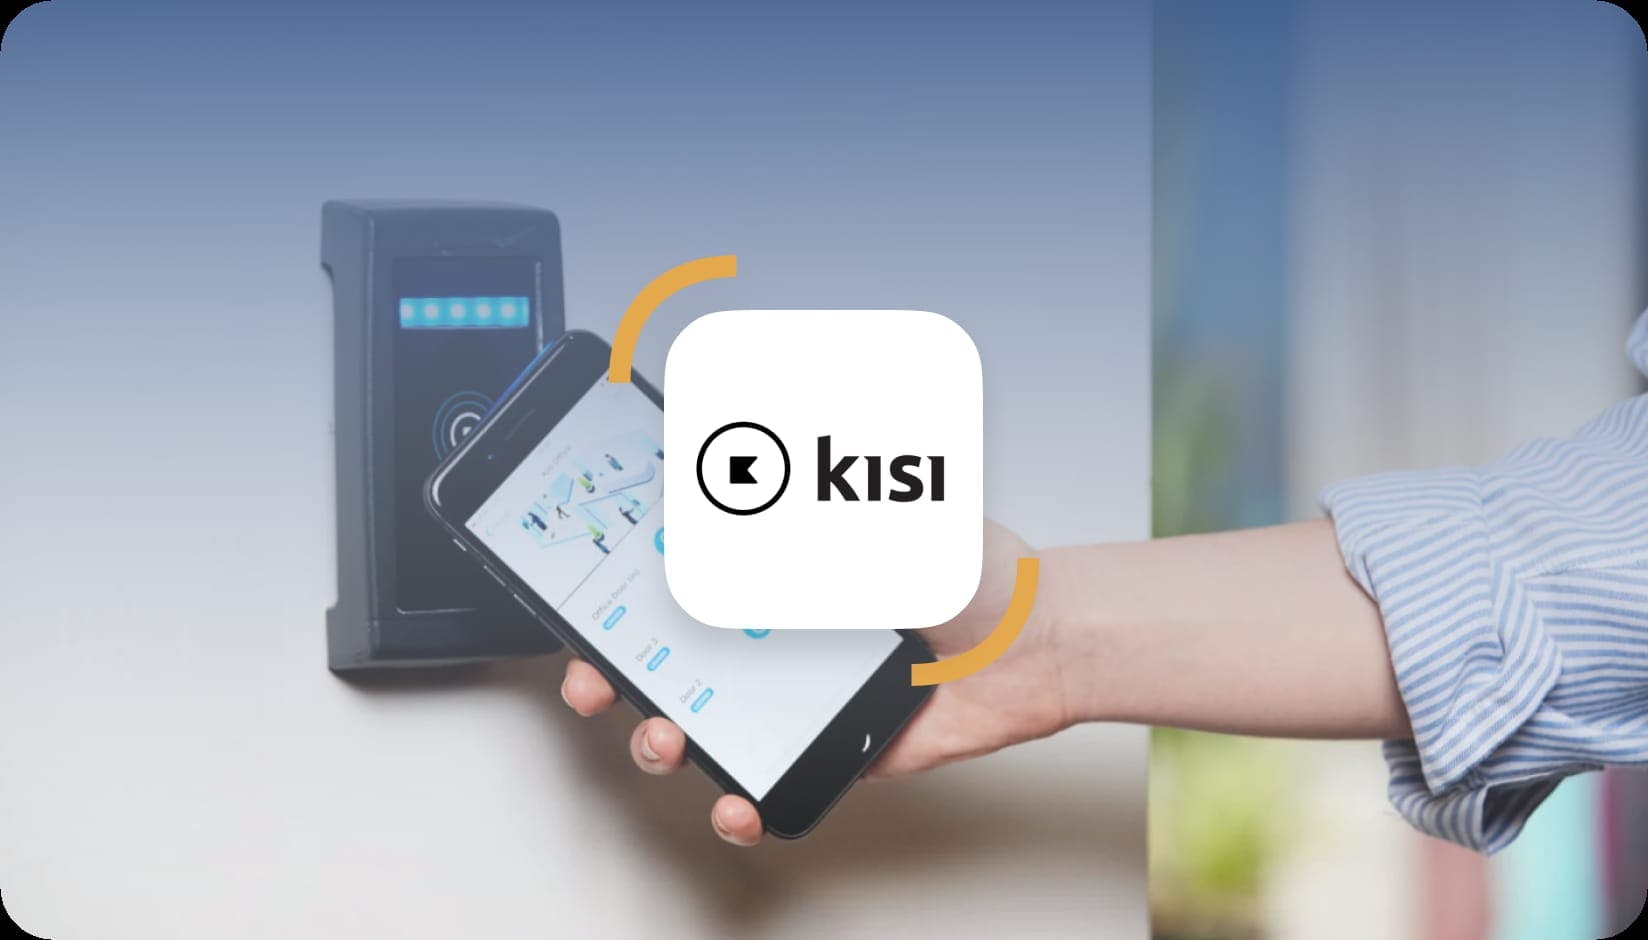 Members Unlock Coworking Space Doors with a Smartphone 24/7 Thanks to Spacebring-Kisi Integration